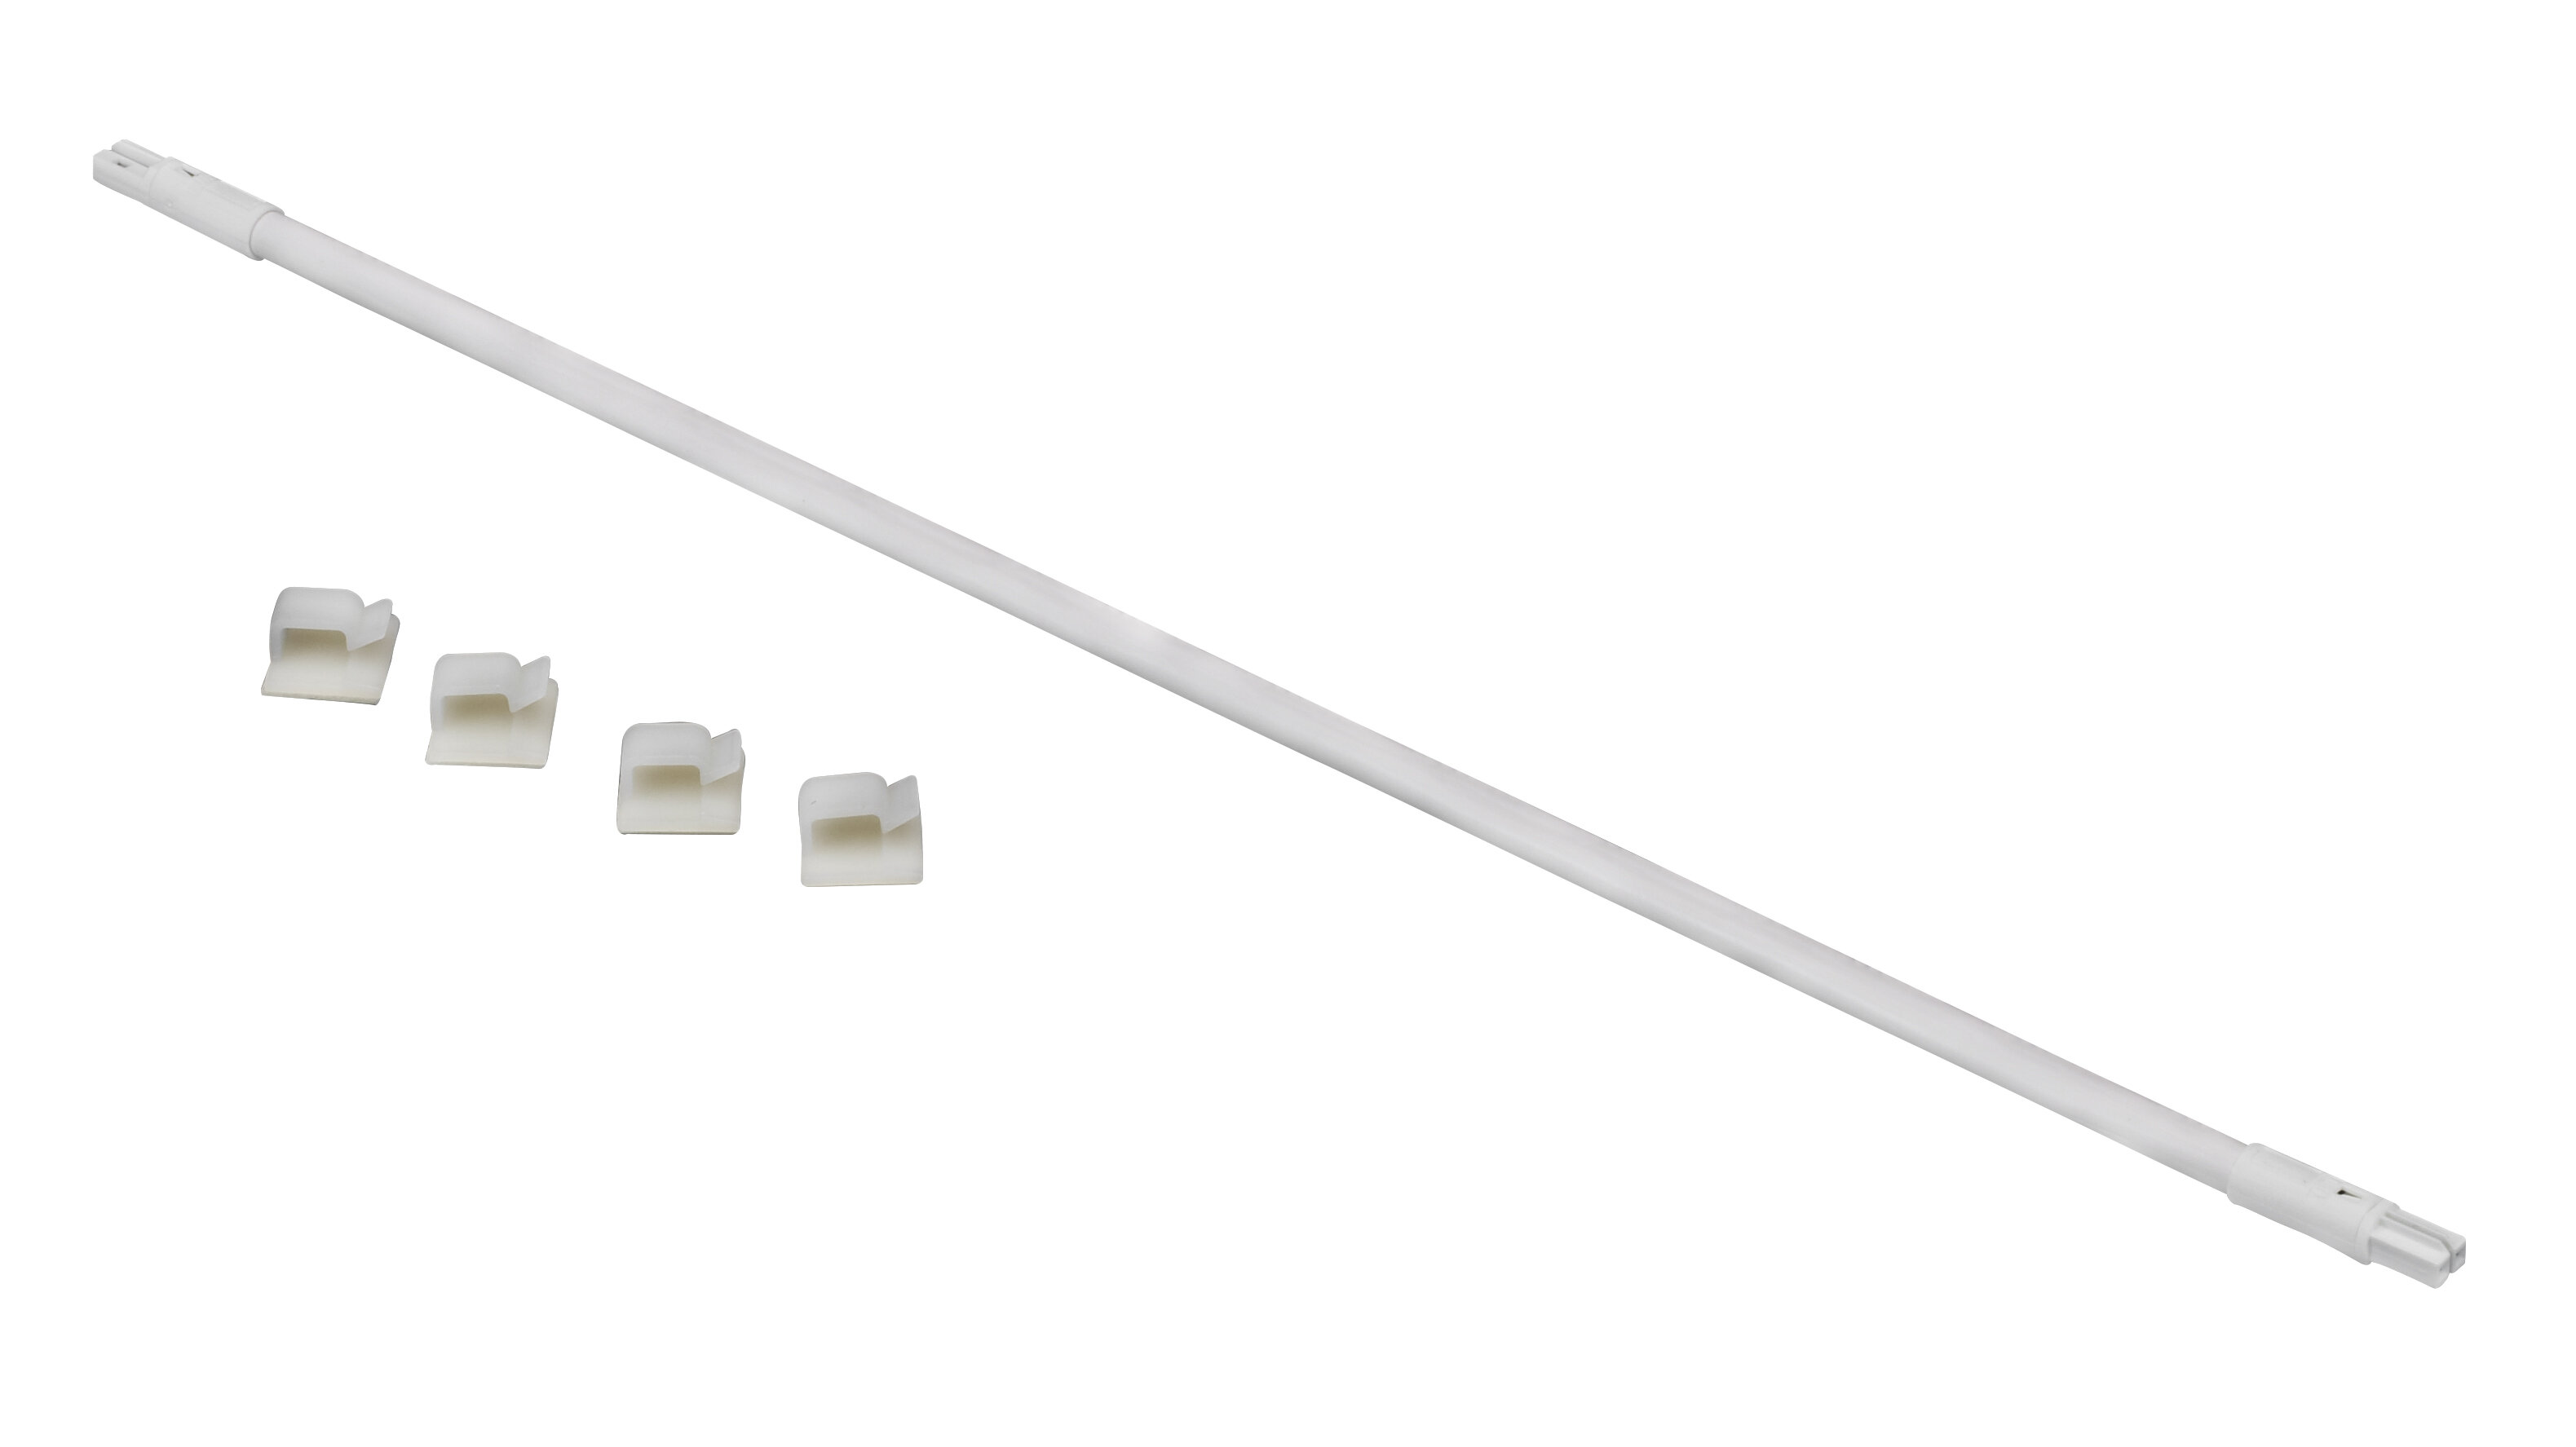 Nuvo Lighting Connecting Cable - 12 Length - For Thread LED Products -  White Finish - Wayfair Canada